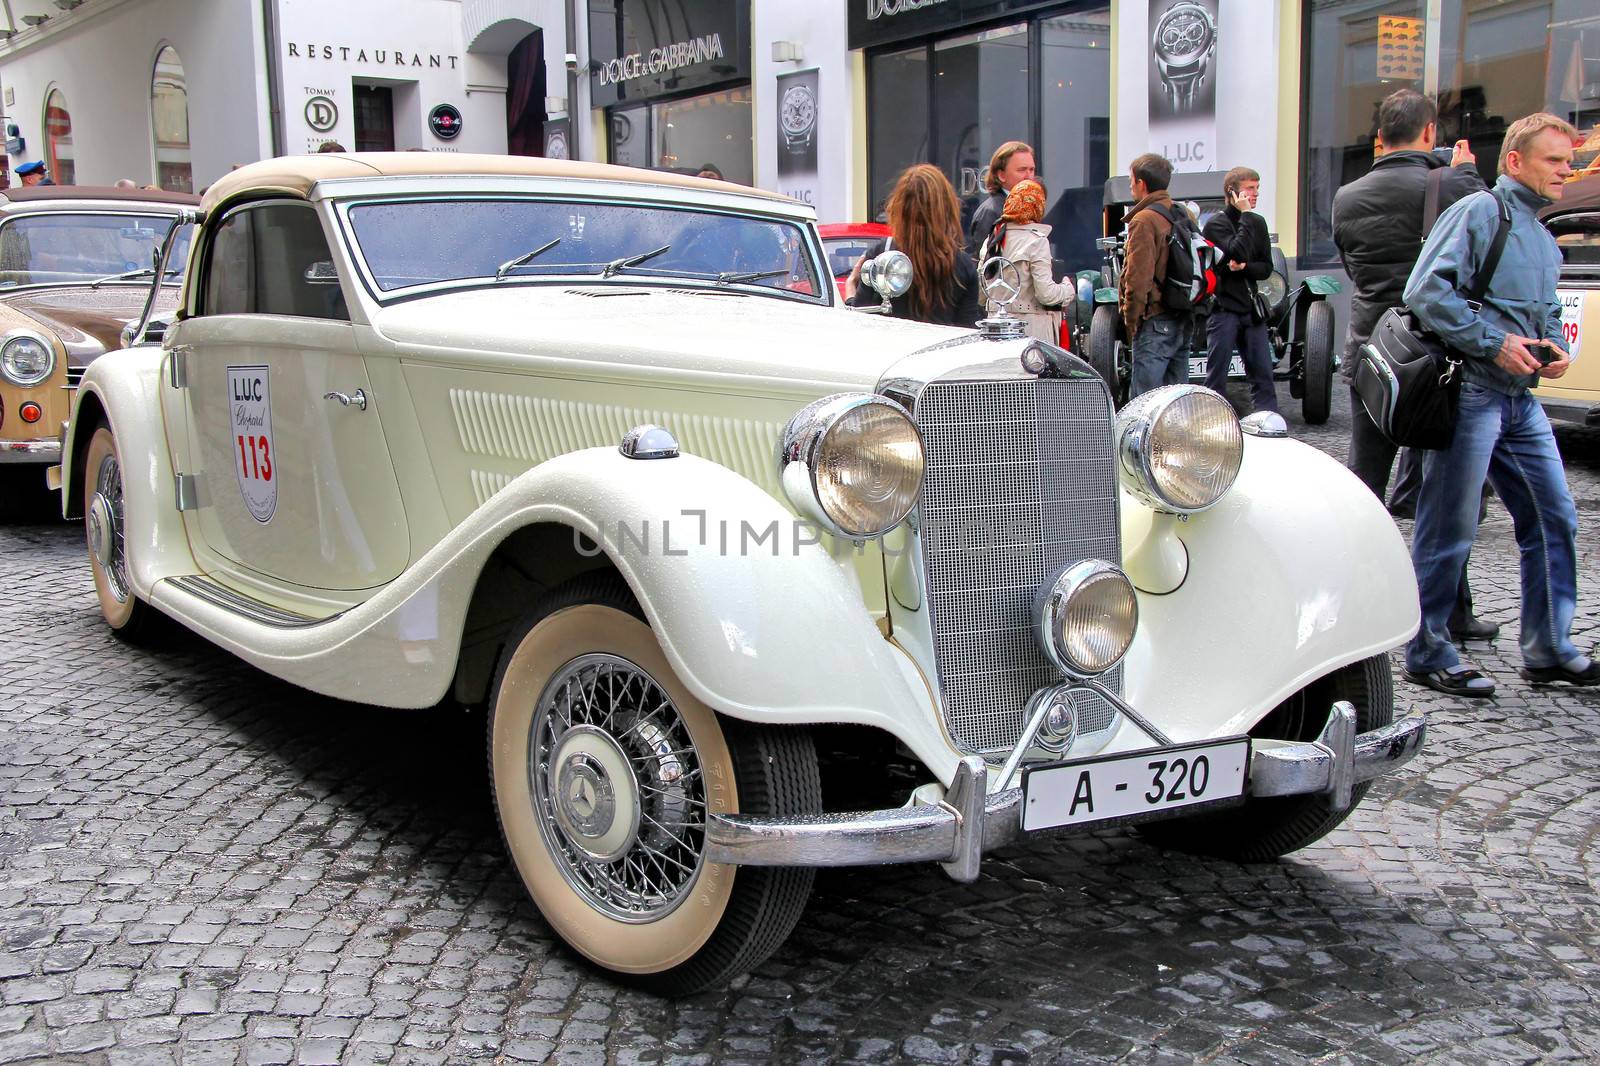 MOSCOW, RUSSIA - JUNE 3: German vehicle 1939 Mercedes-Benz 320 competes at the annual L.U.C. Chopard Classic Weekend Rally on June 3, 2012 in Moscow, Russia.